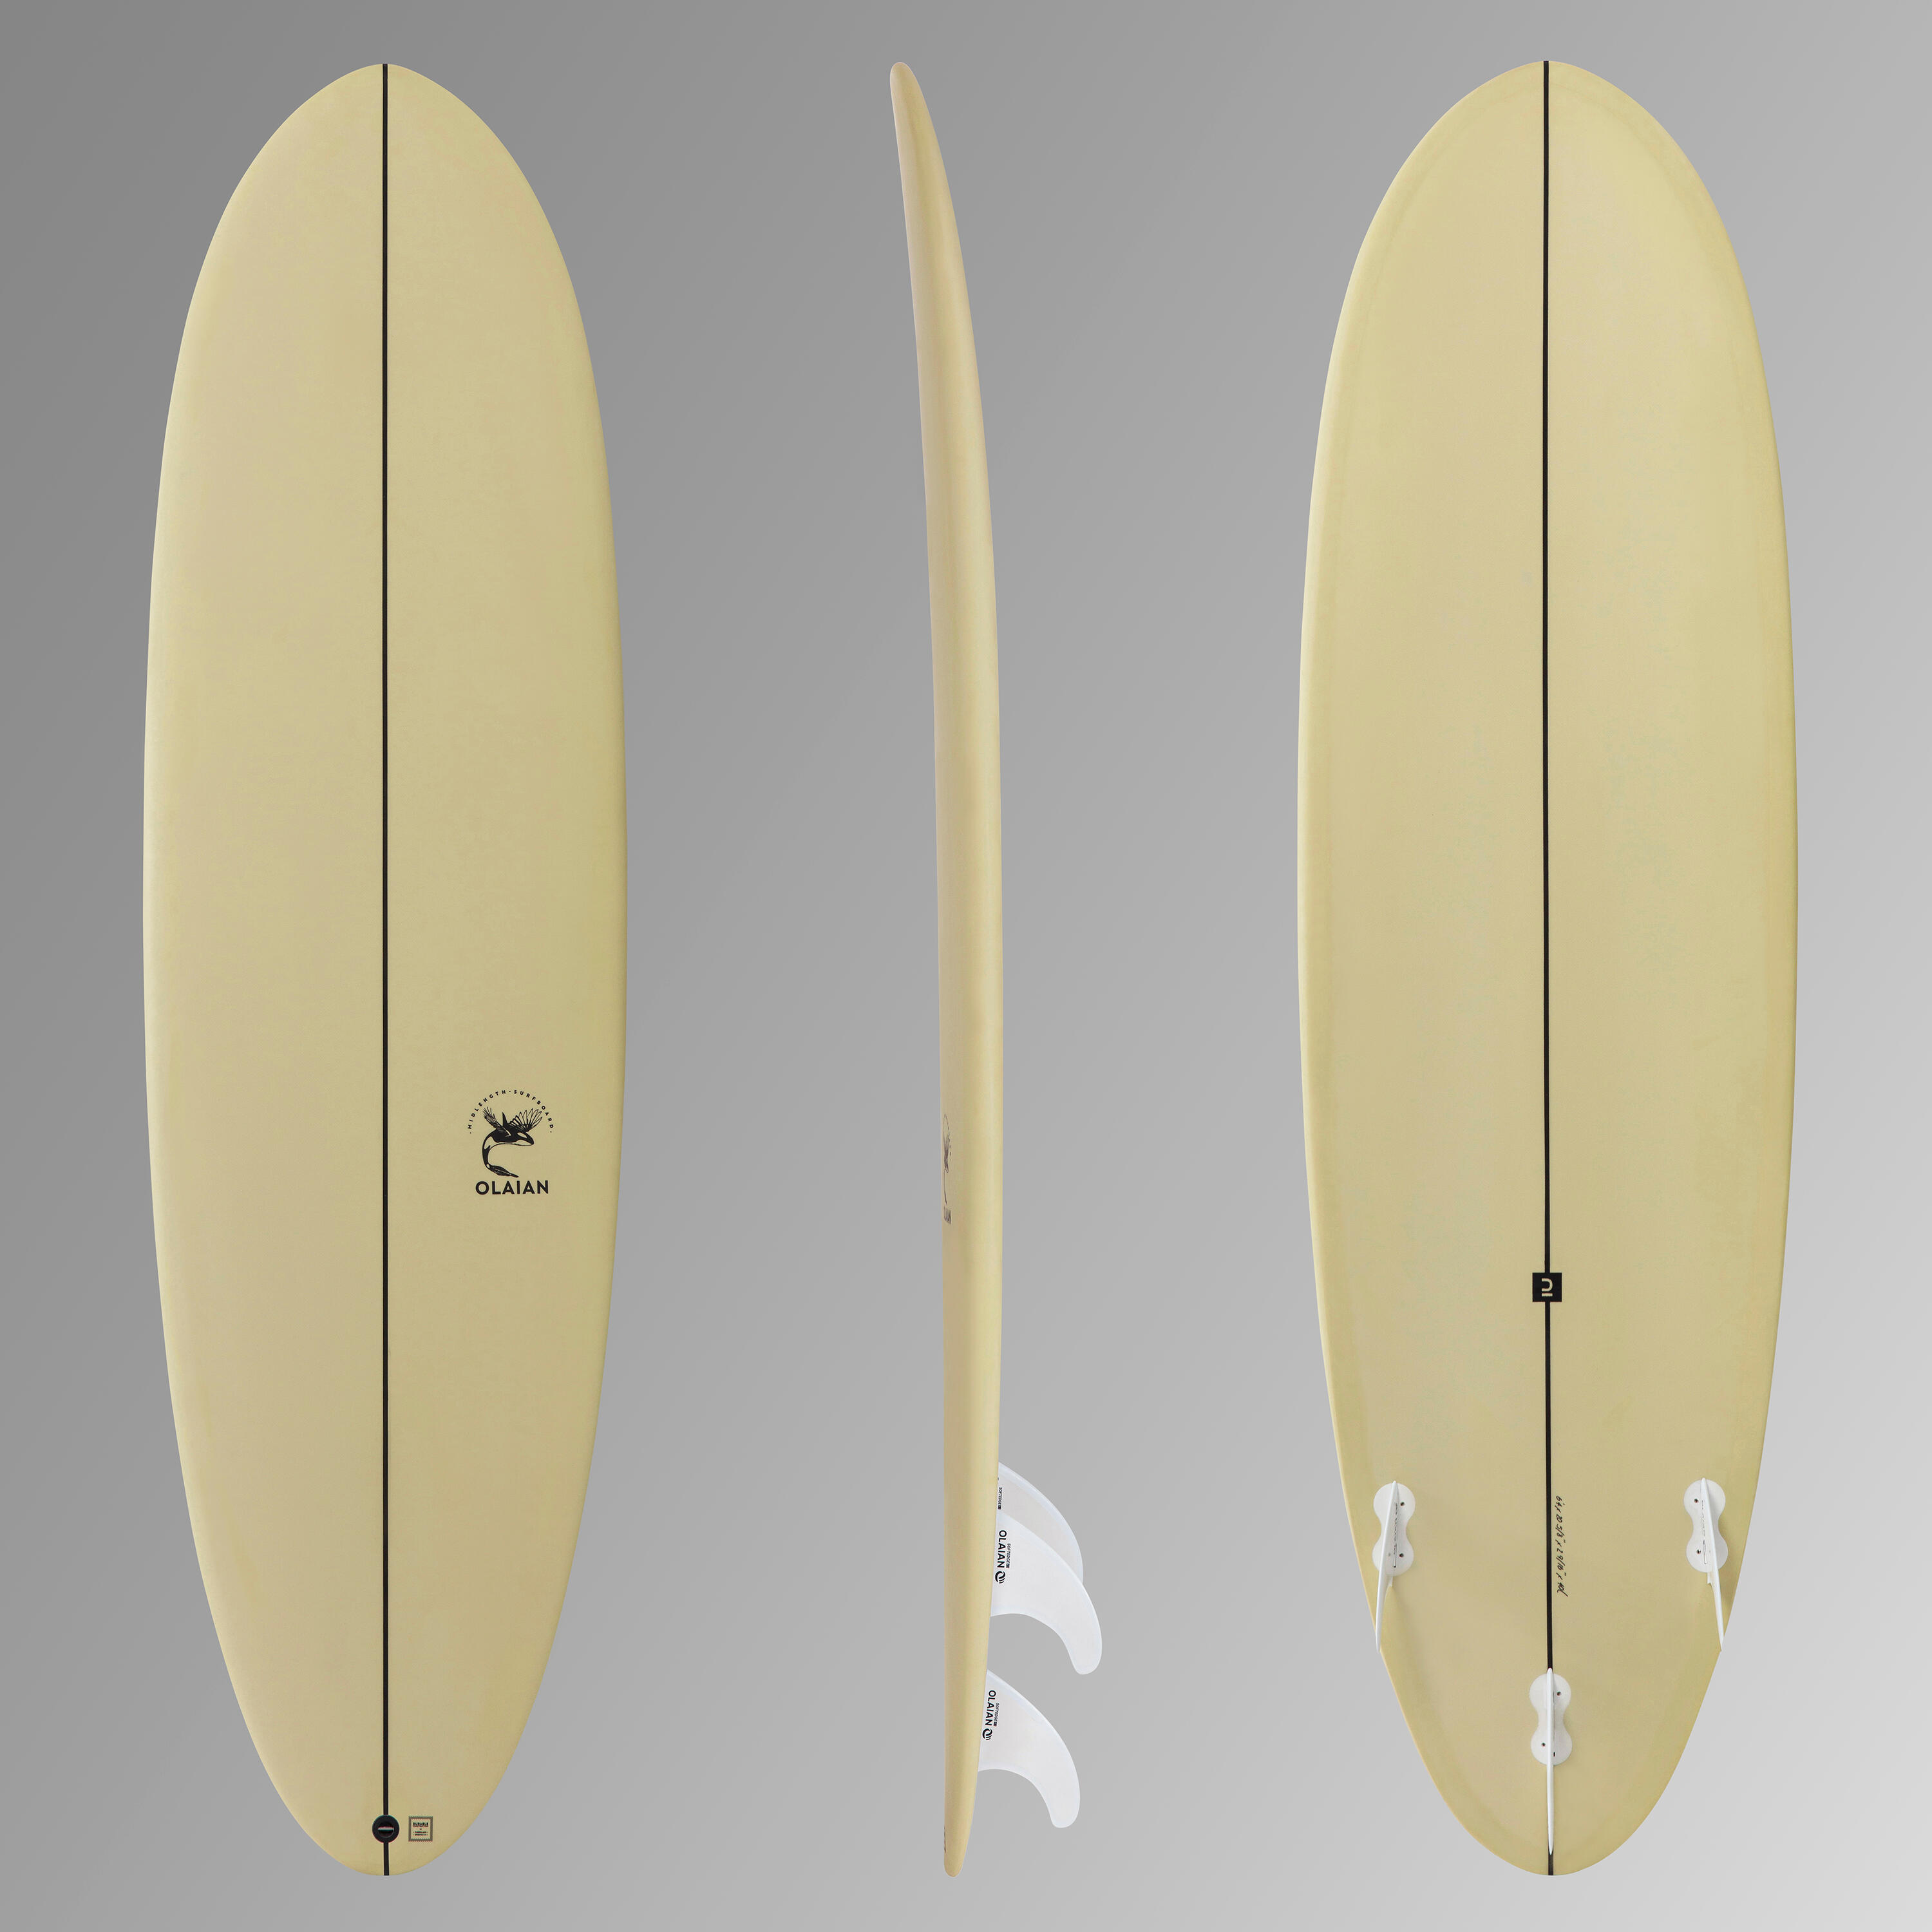 OLAIAN SURF 500 Hybrid 6'4", complete with 3 fins.